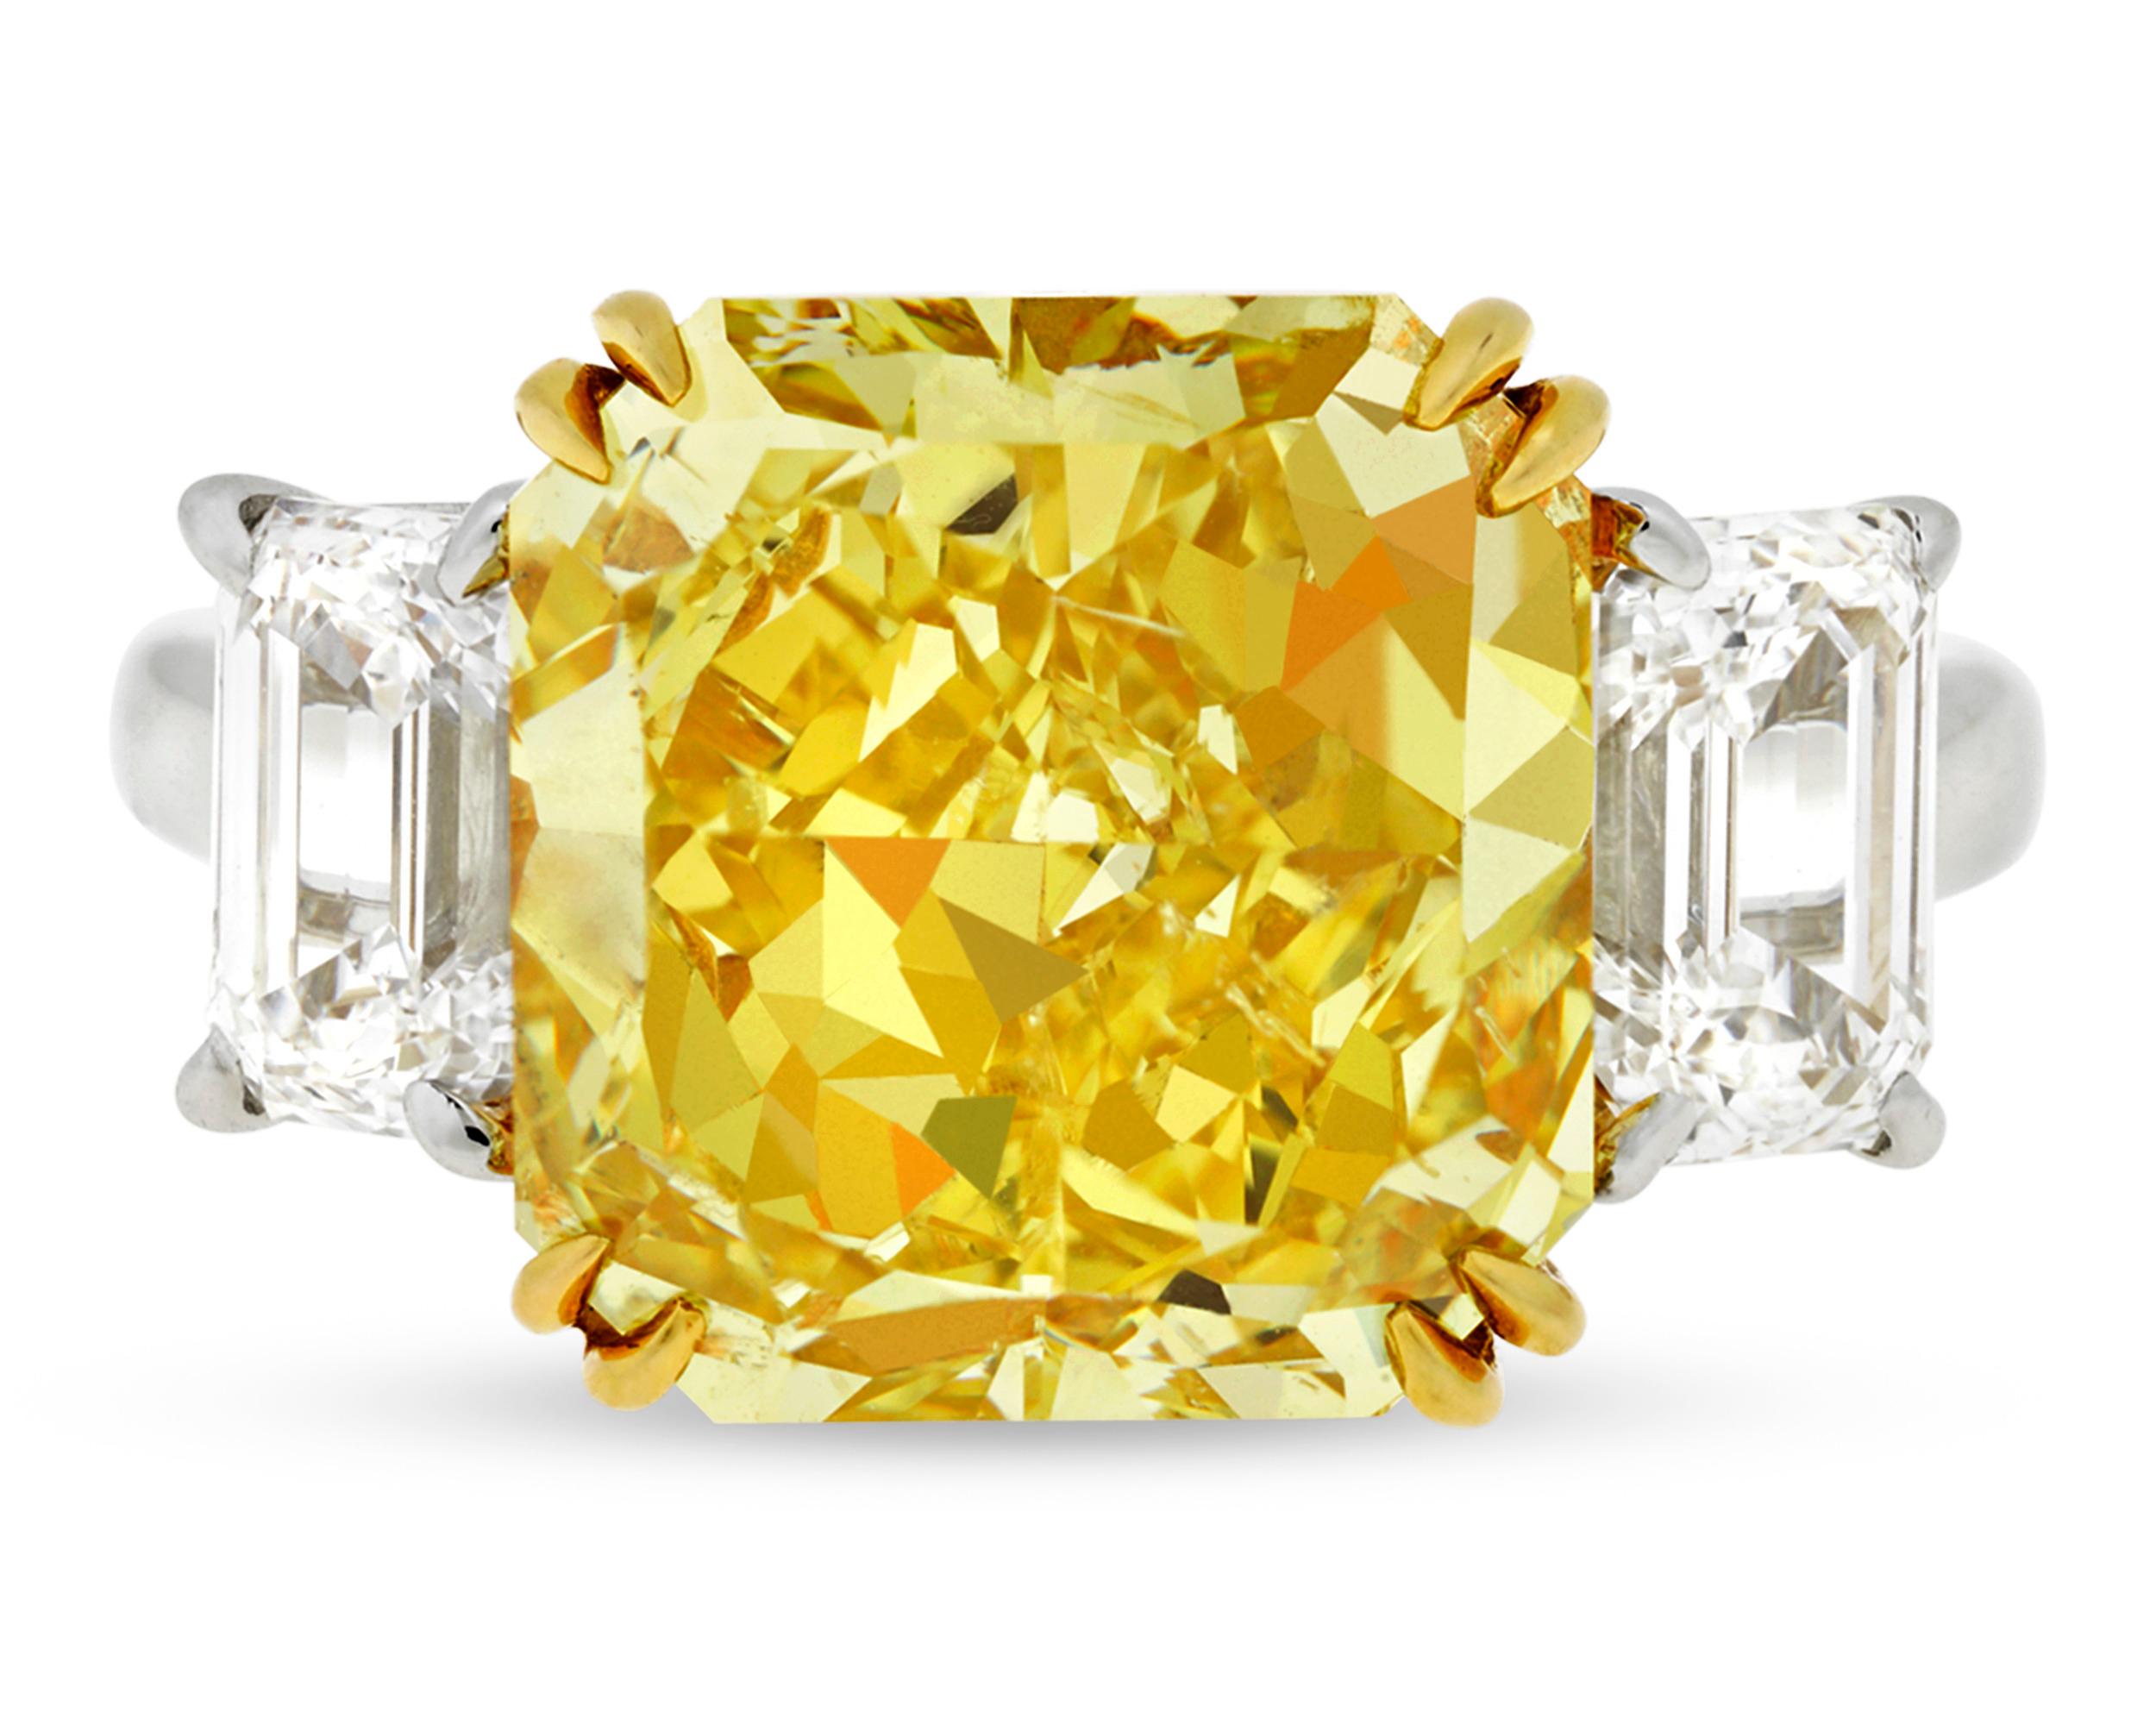 This spectacular Harry Winston ring is set with an absolutely extraordinary 7.72-carat fancy vivid yellow diamond of breathtaking beauty. The rare stone is GIA-certified as Natural Fancy Vivid Yellow, and its highly saturated color displays